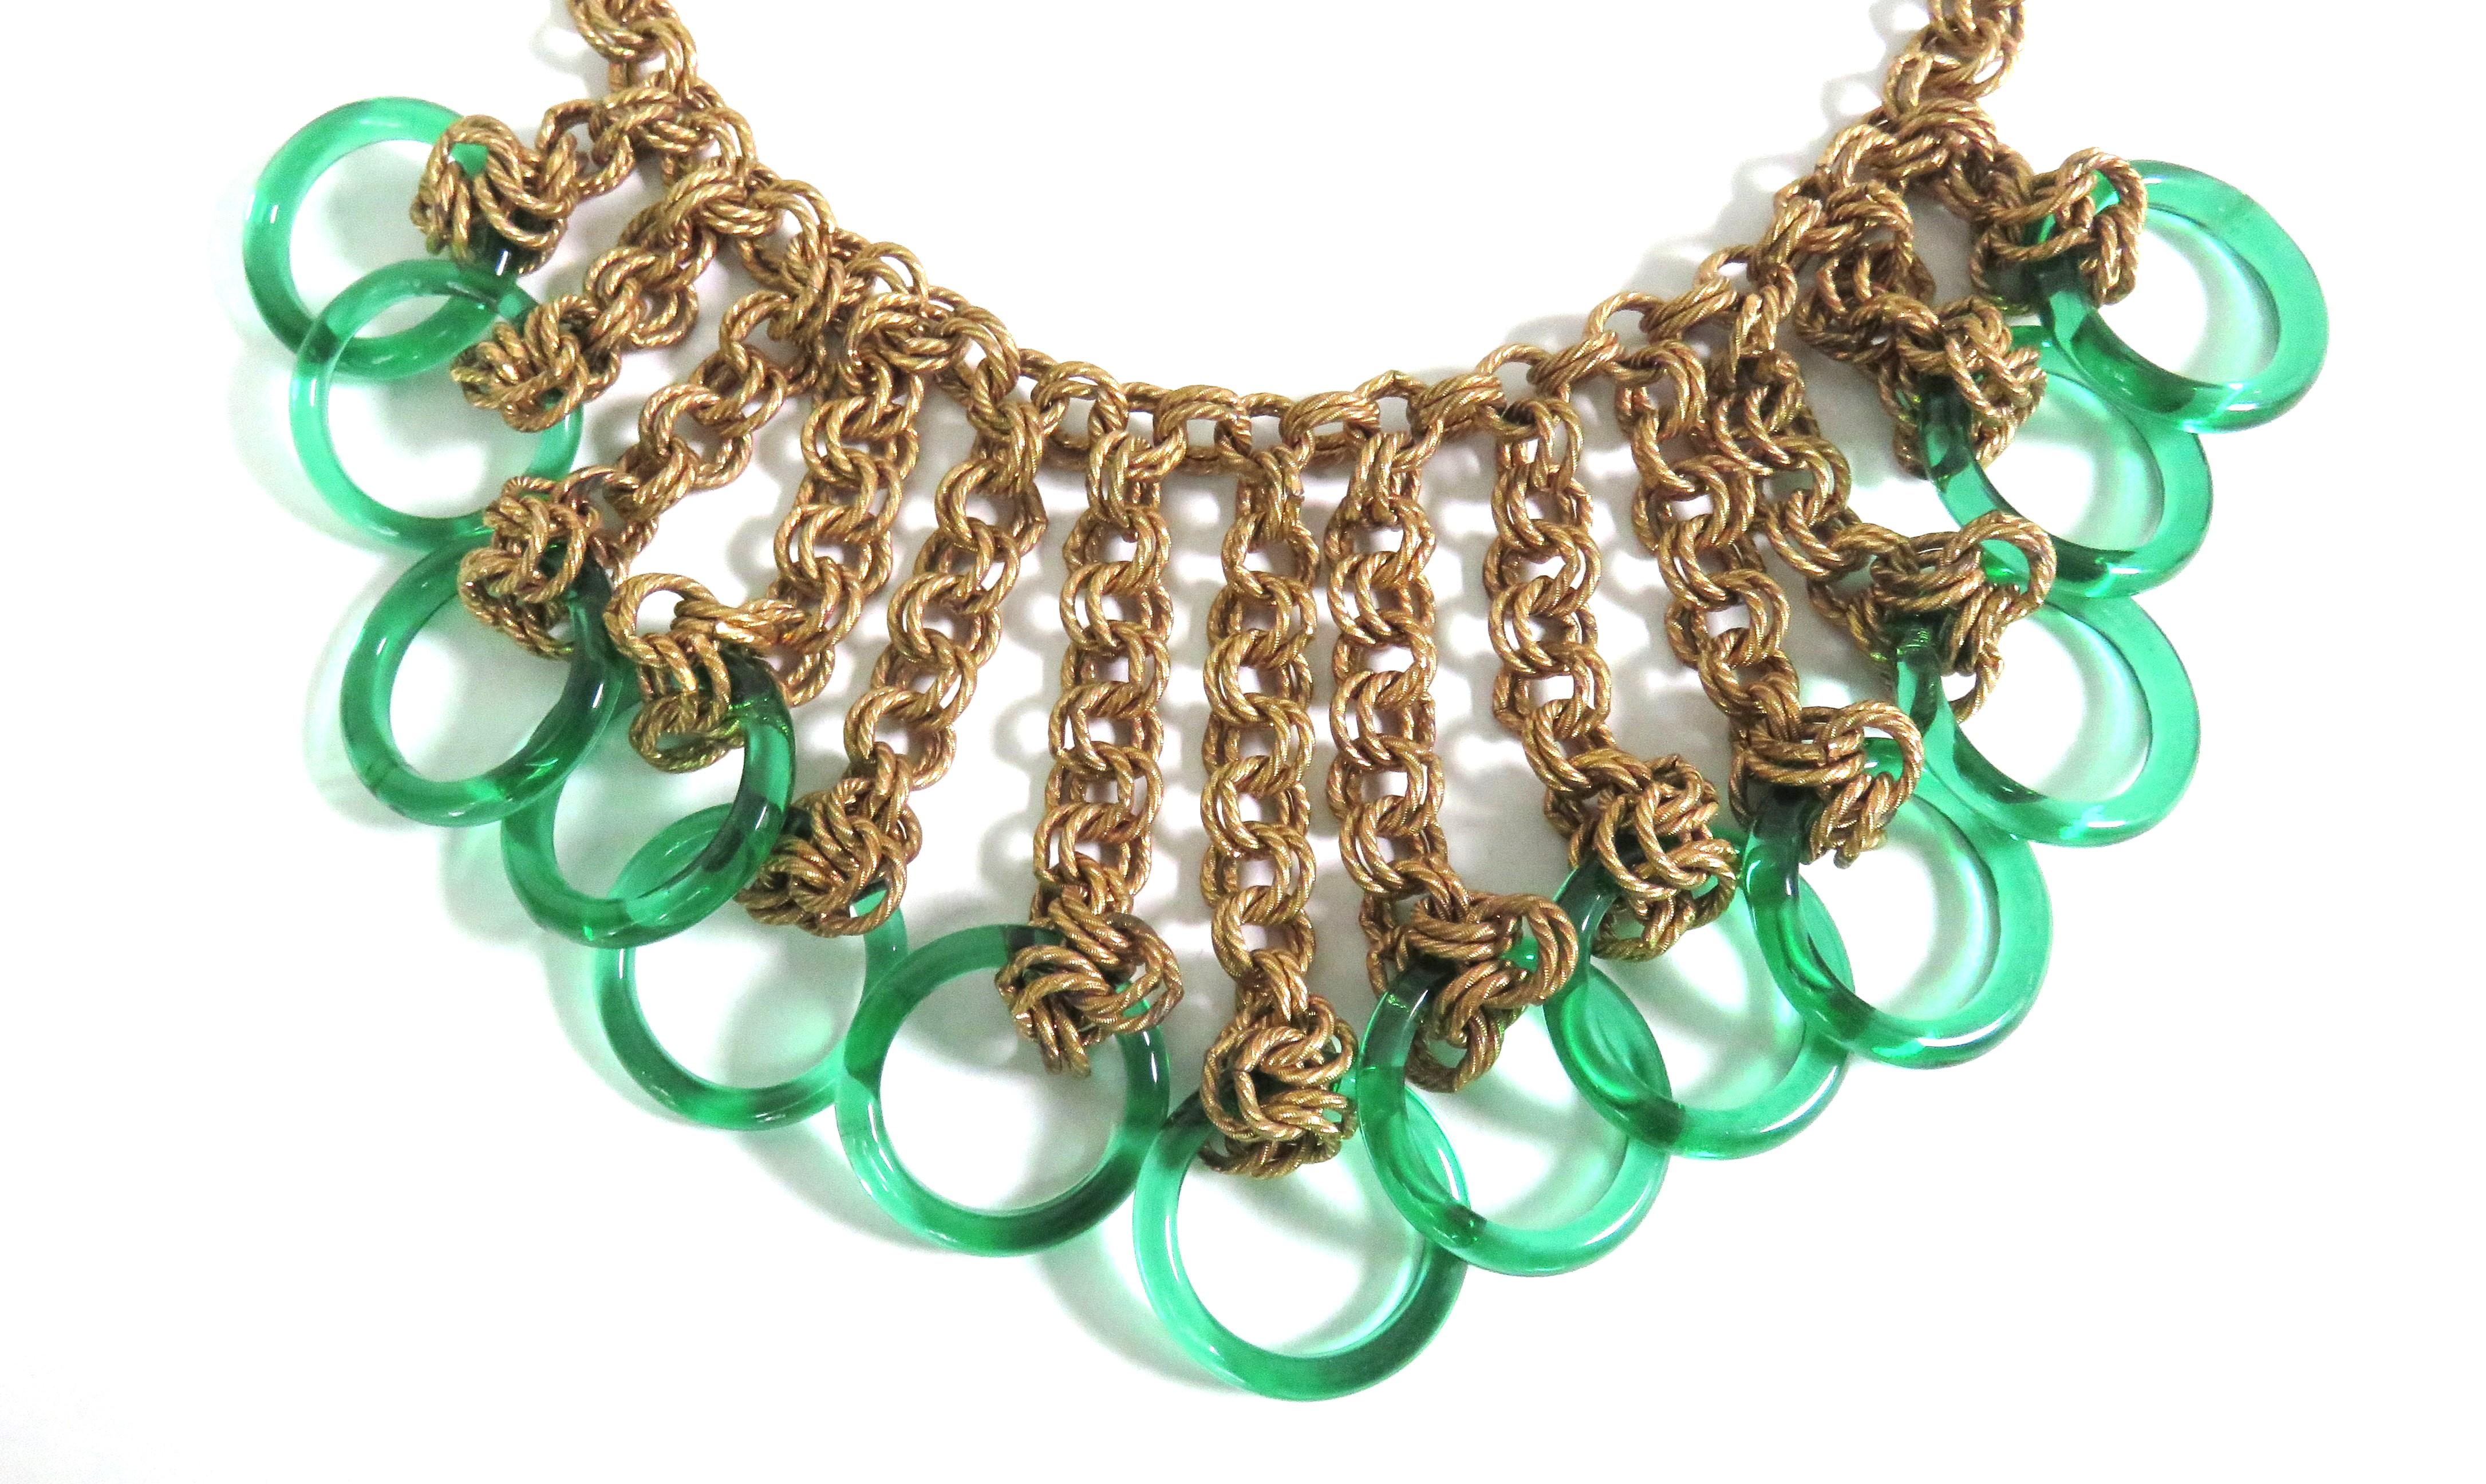 Chain Bib 1940s Necklace with Green Glass Circles For Sale 1